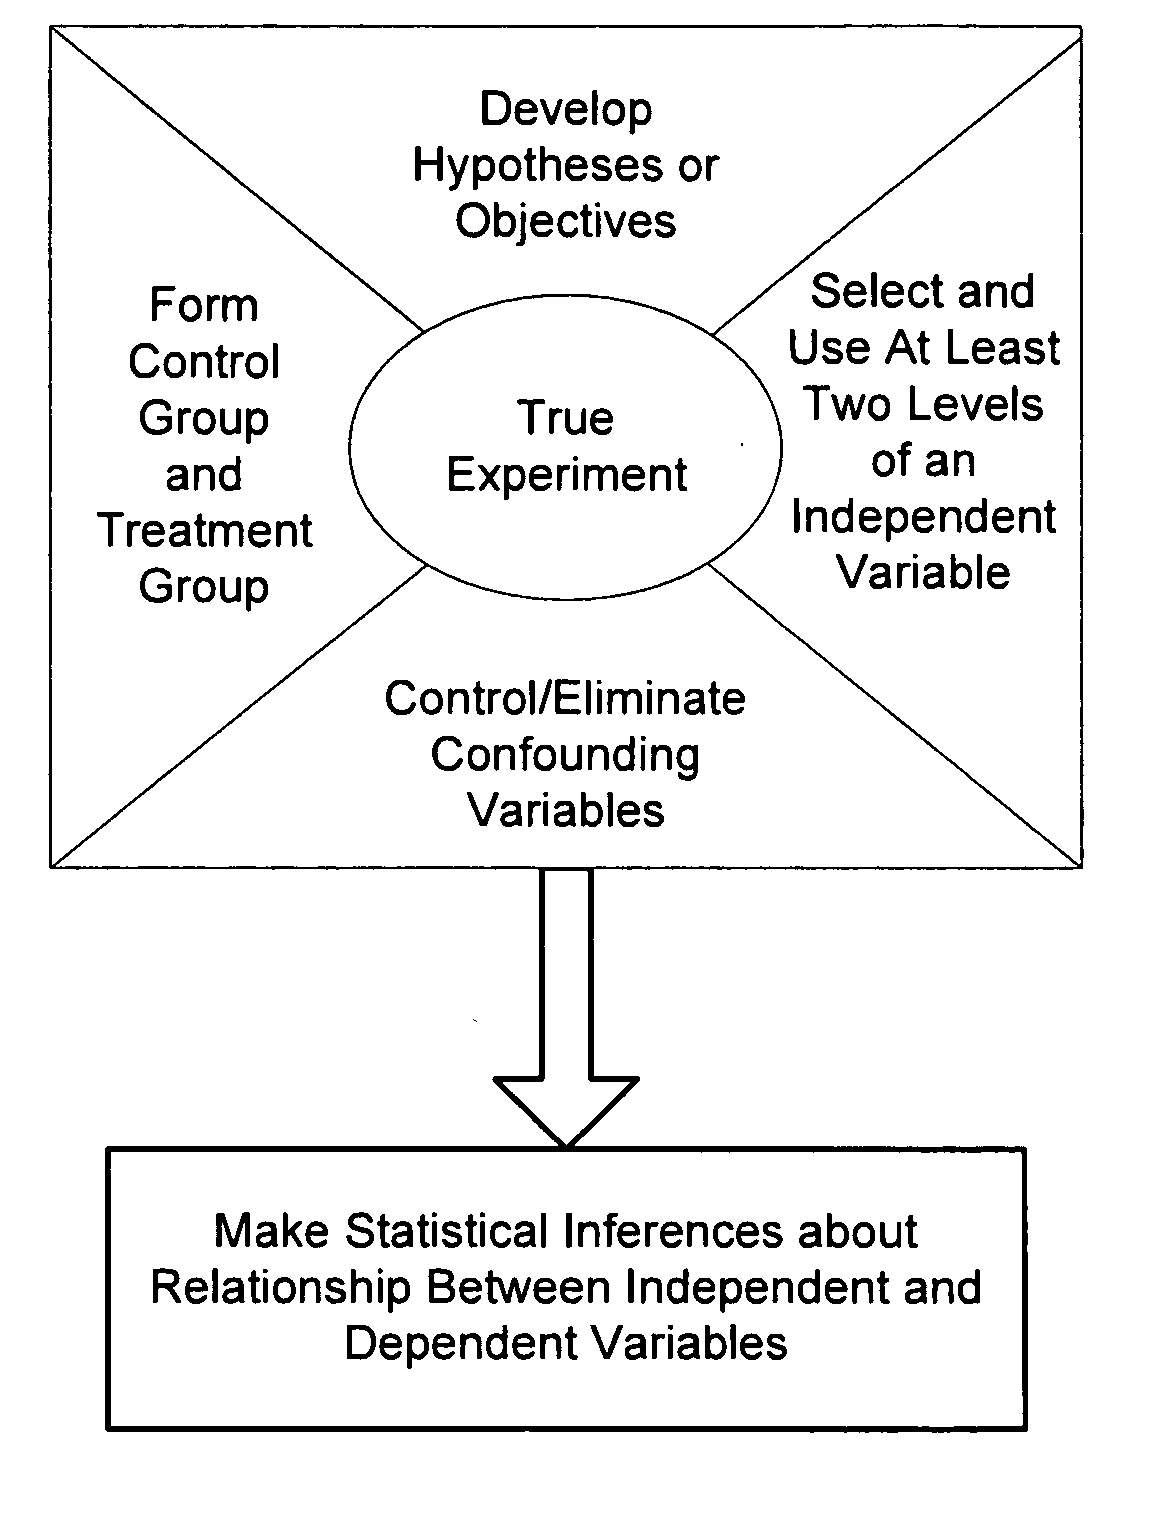 Systems and methods for designing experiments